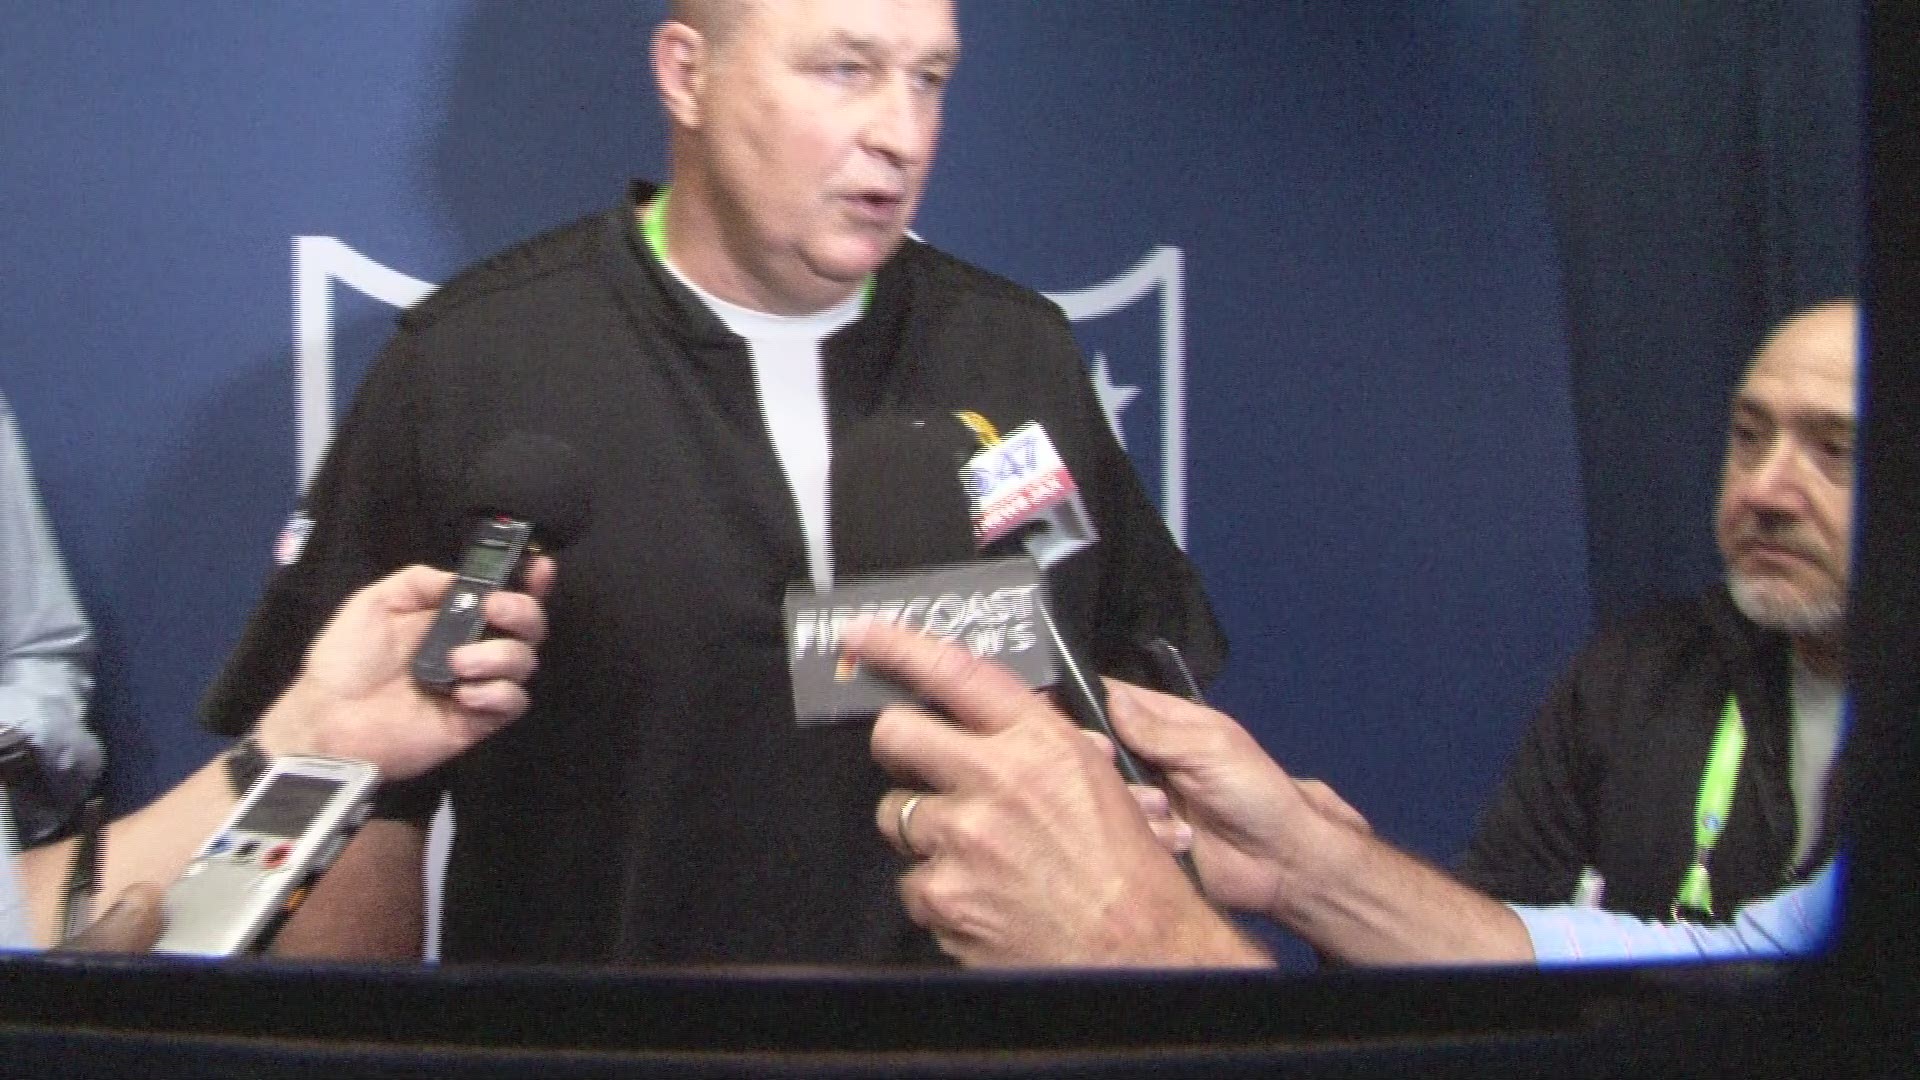 Jaguars' fourth-year head coach Doug Marrone met the media Tuesday at the NFL Combine to discuss top priorities for the team in 2020.